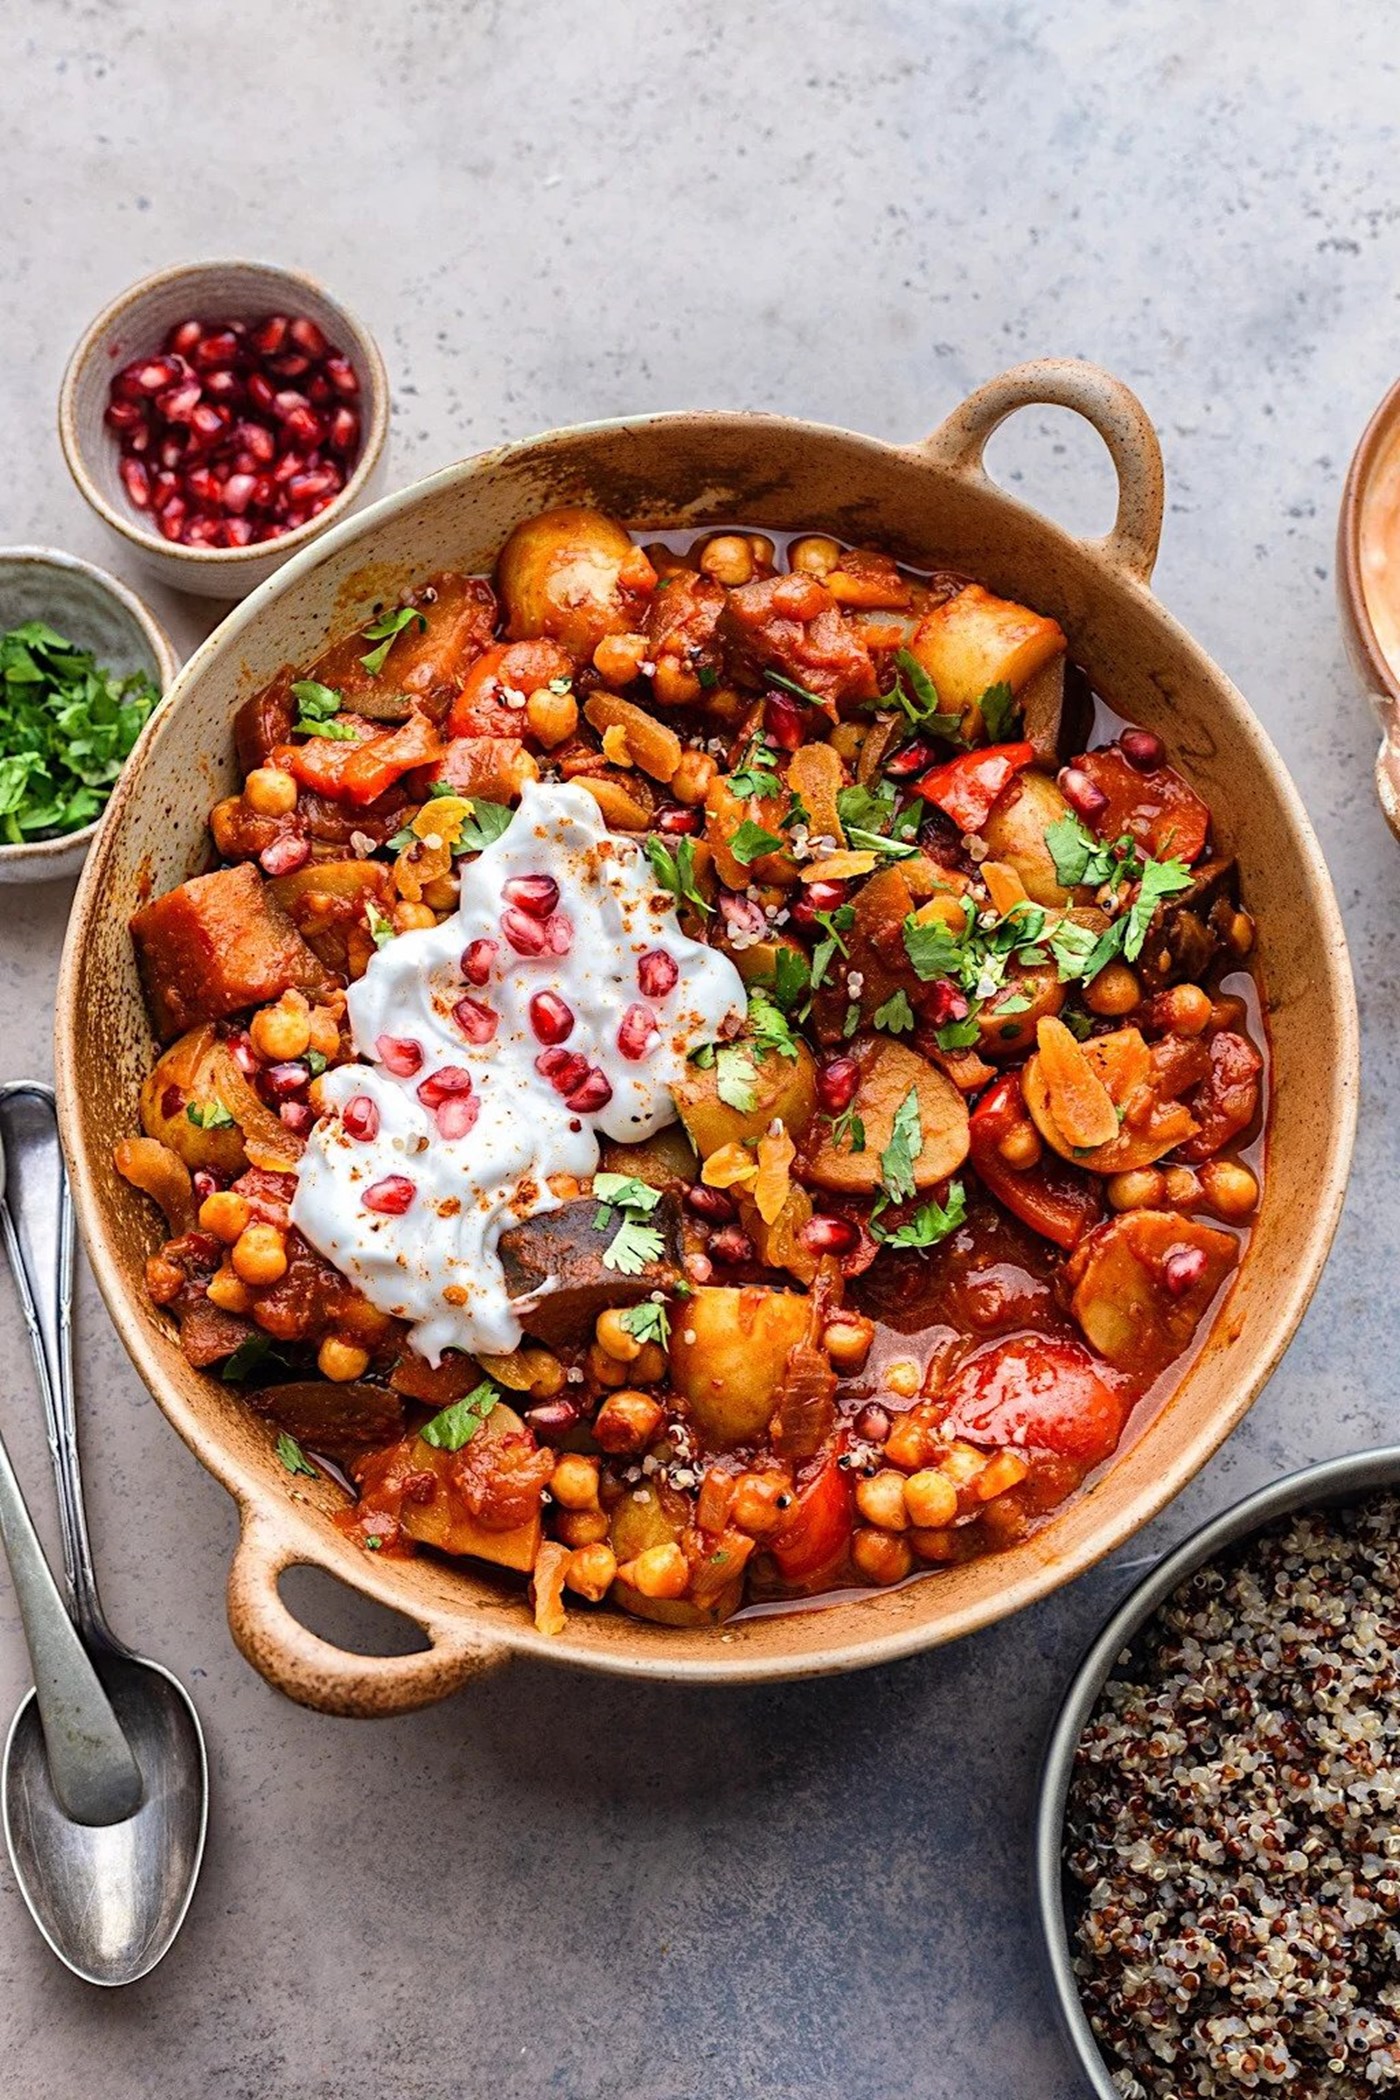 Harissa Vegetable and Chickpea Stew, Cupful of Kale